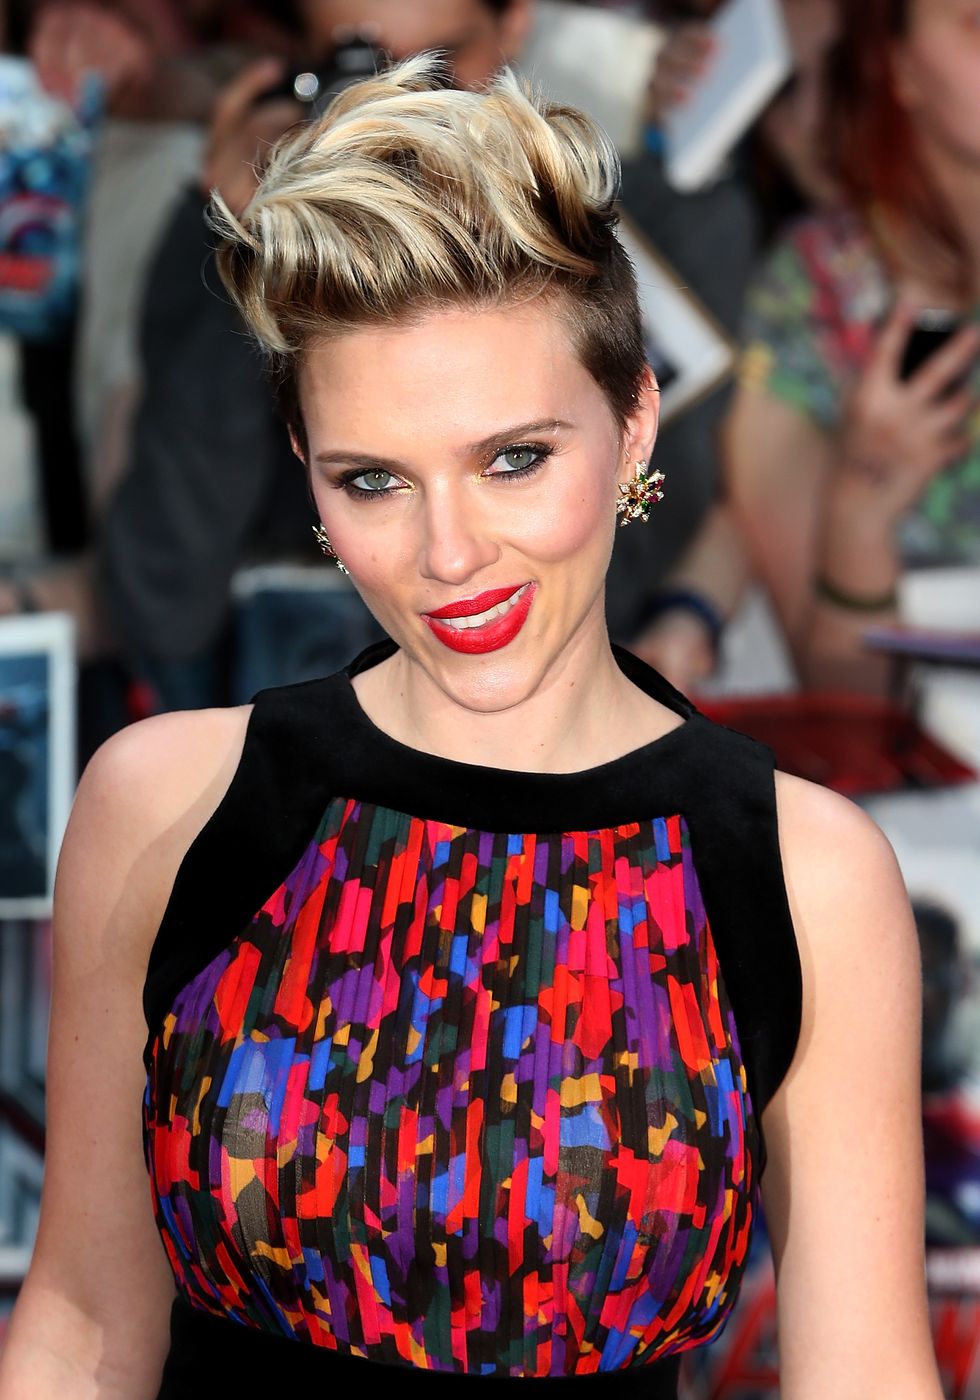 Scarlett Johansson's hairstyle at The Avengers premiere